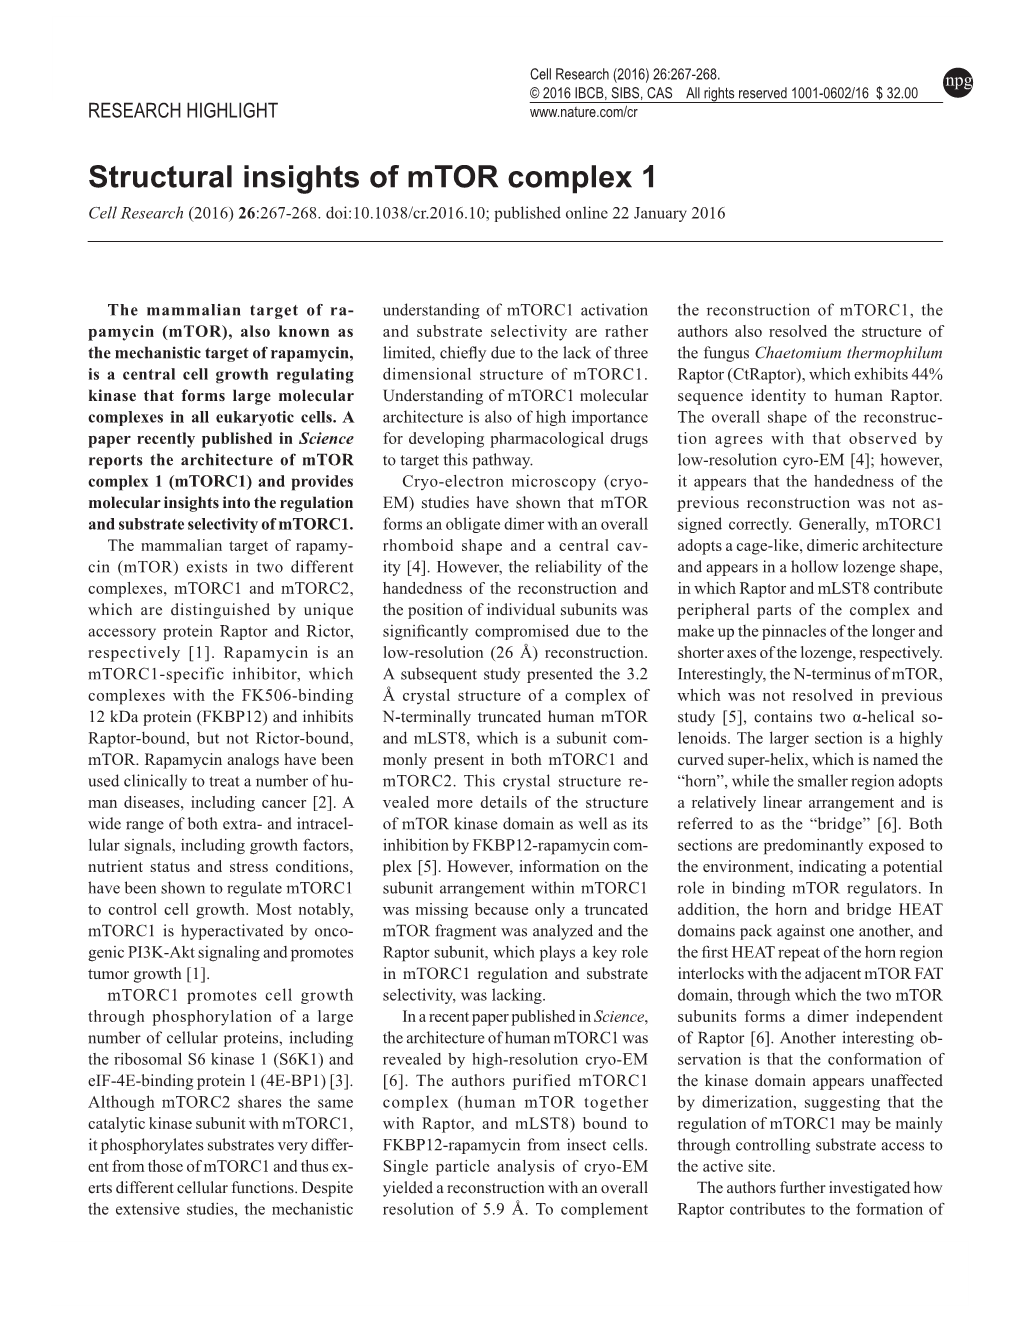 Structural Insights of Mtor Complex 1 Cell Research (2016) 26:267-268